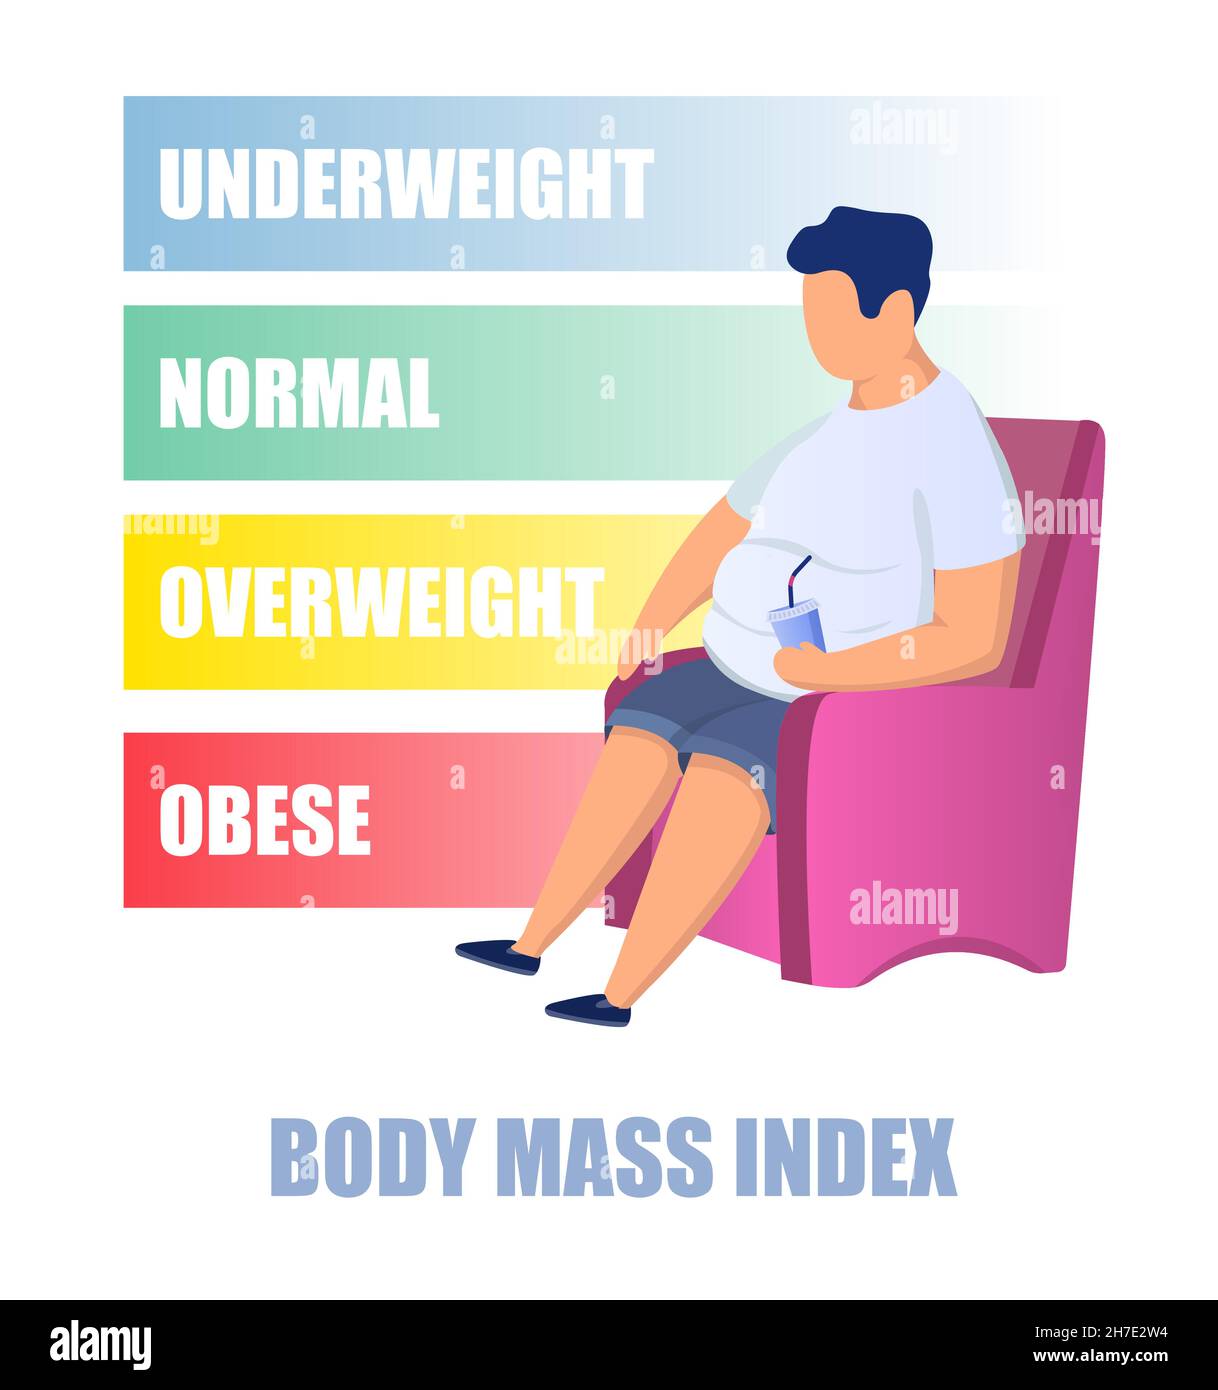 https://c8.alamy.com/comp/2H7E2W4/bmi-body-mass-index-chart-vector-illustration-obese-overweight-normal-underweight-body-fat-measurement-tool-2H7E2W4.jpg